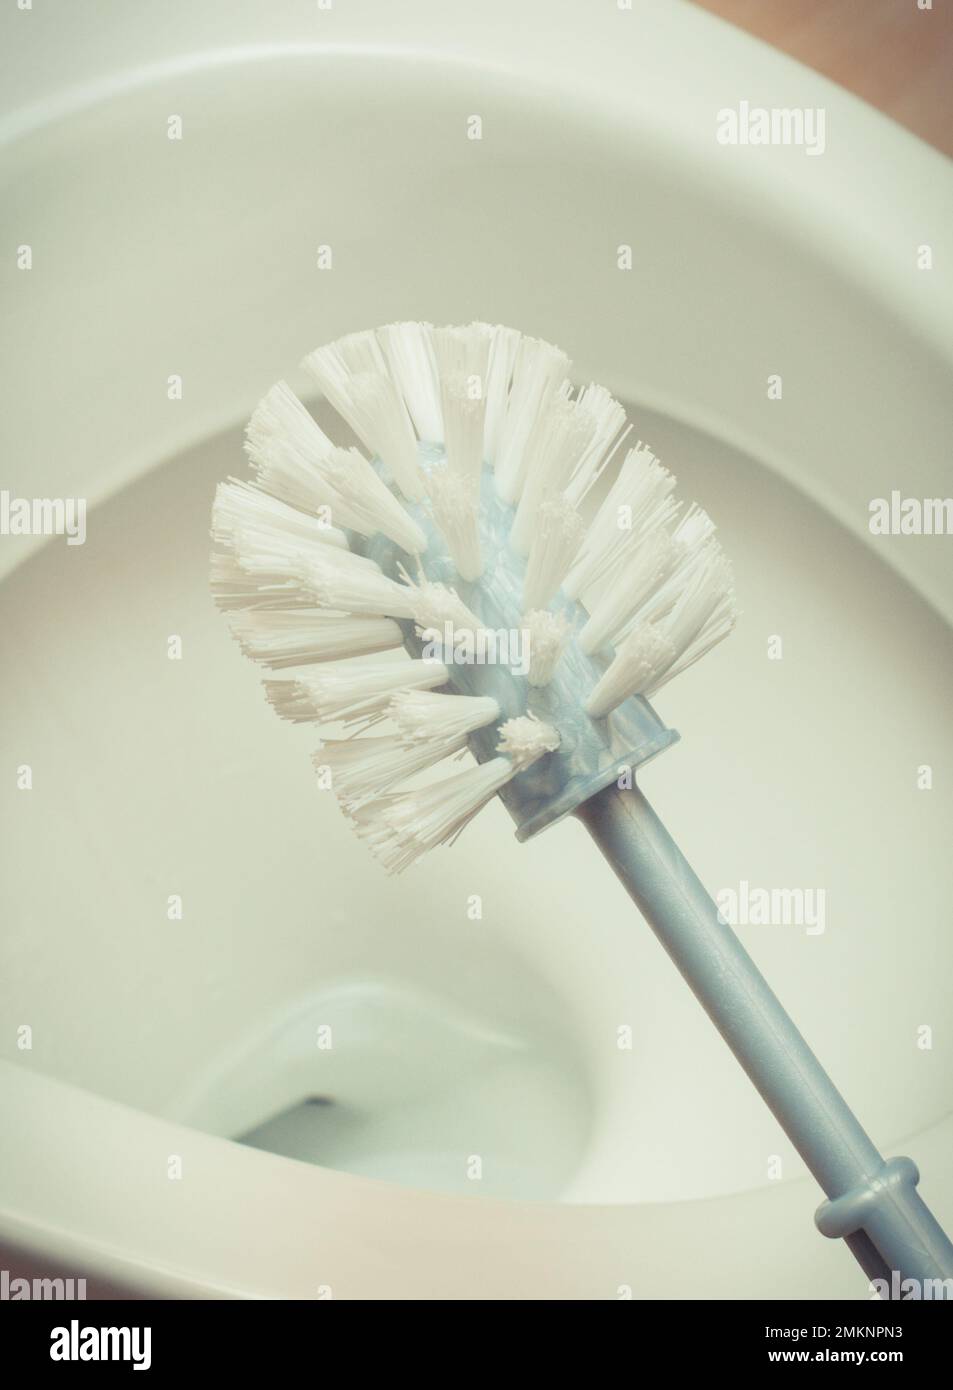 Different Toilet Cleaning Supplies On Wooden Stock Photo